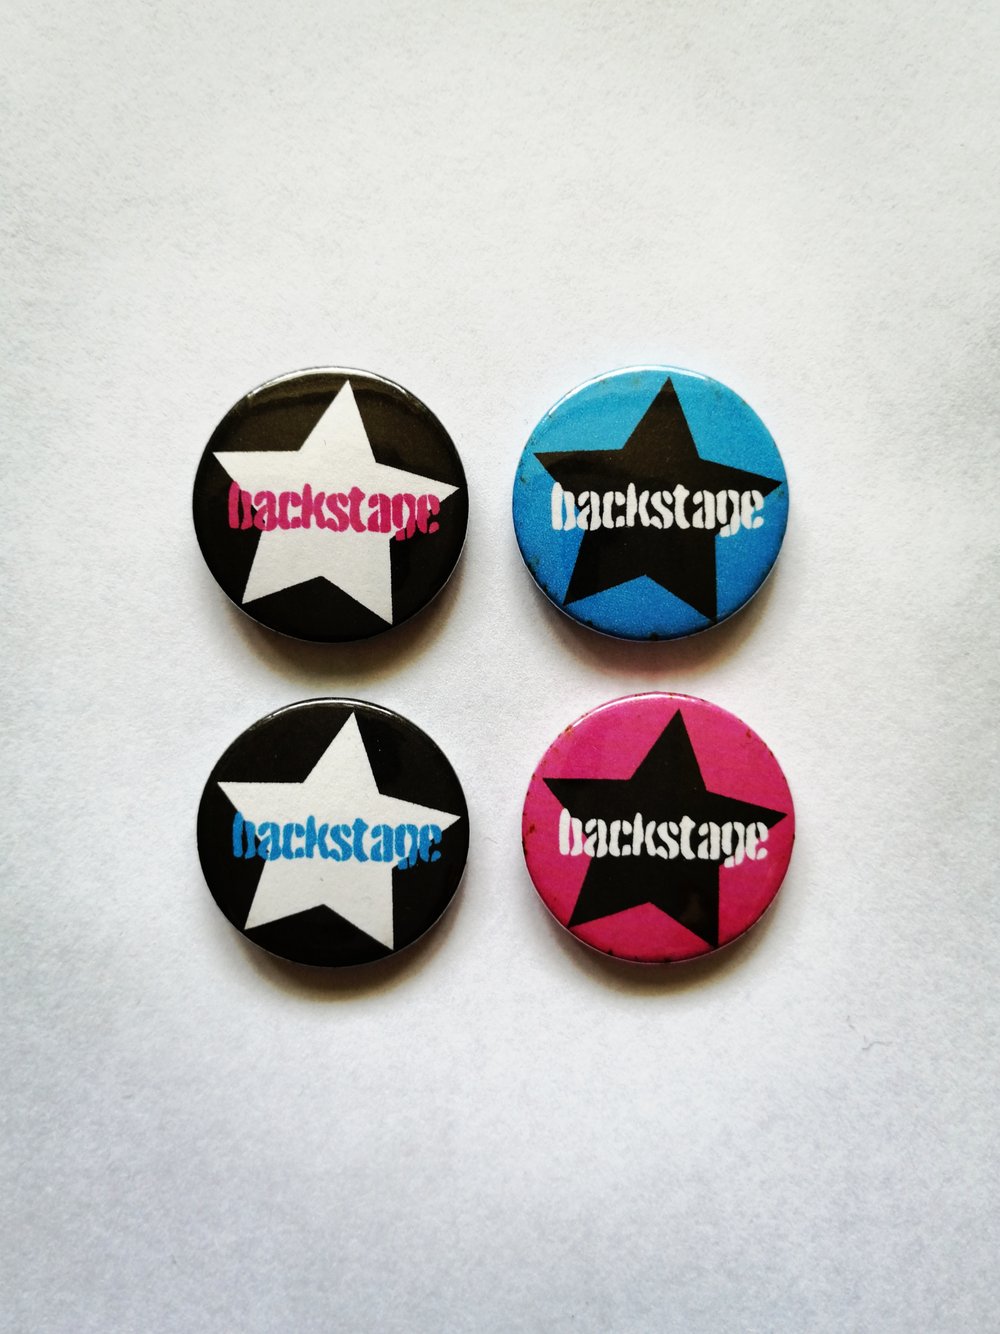 BACKSTAGE Pins (2 for 1)